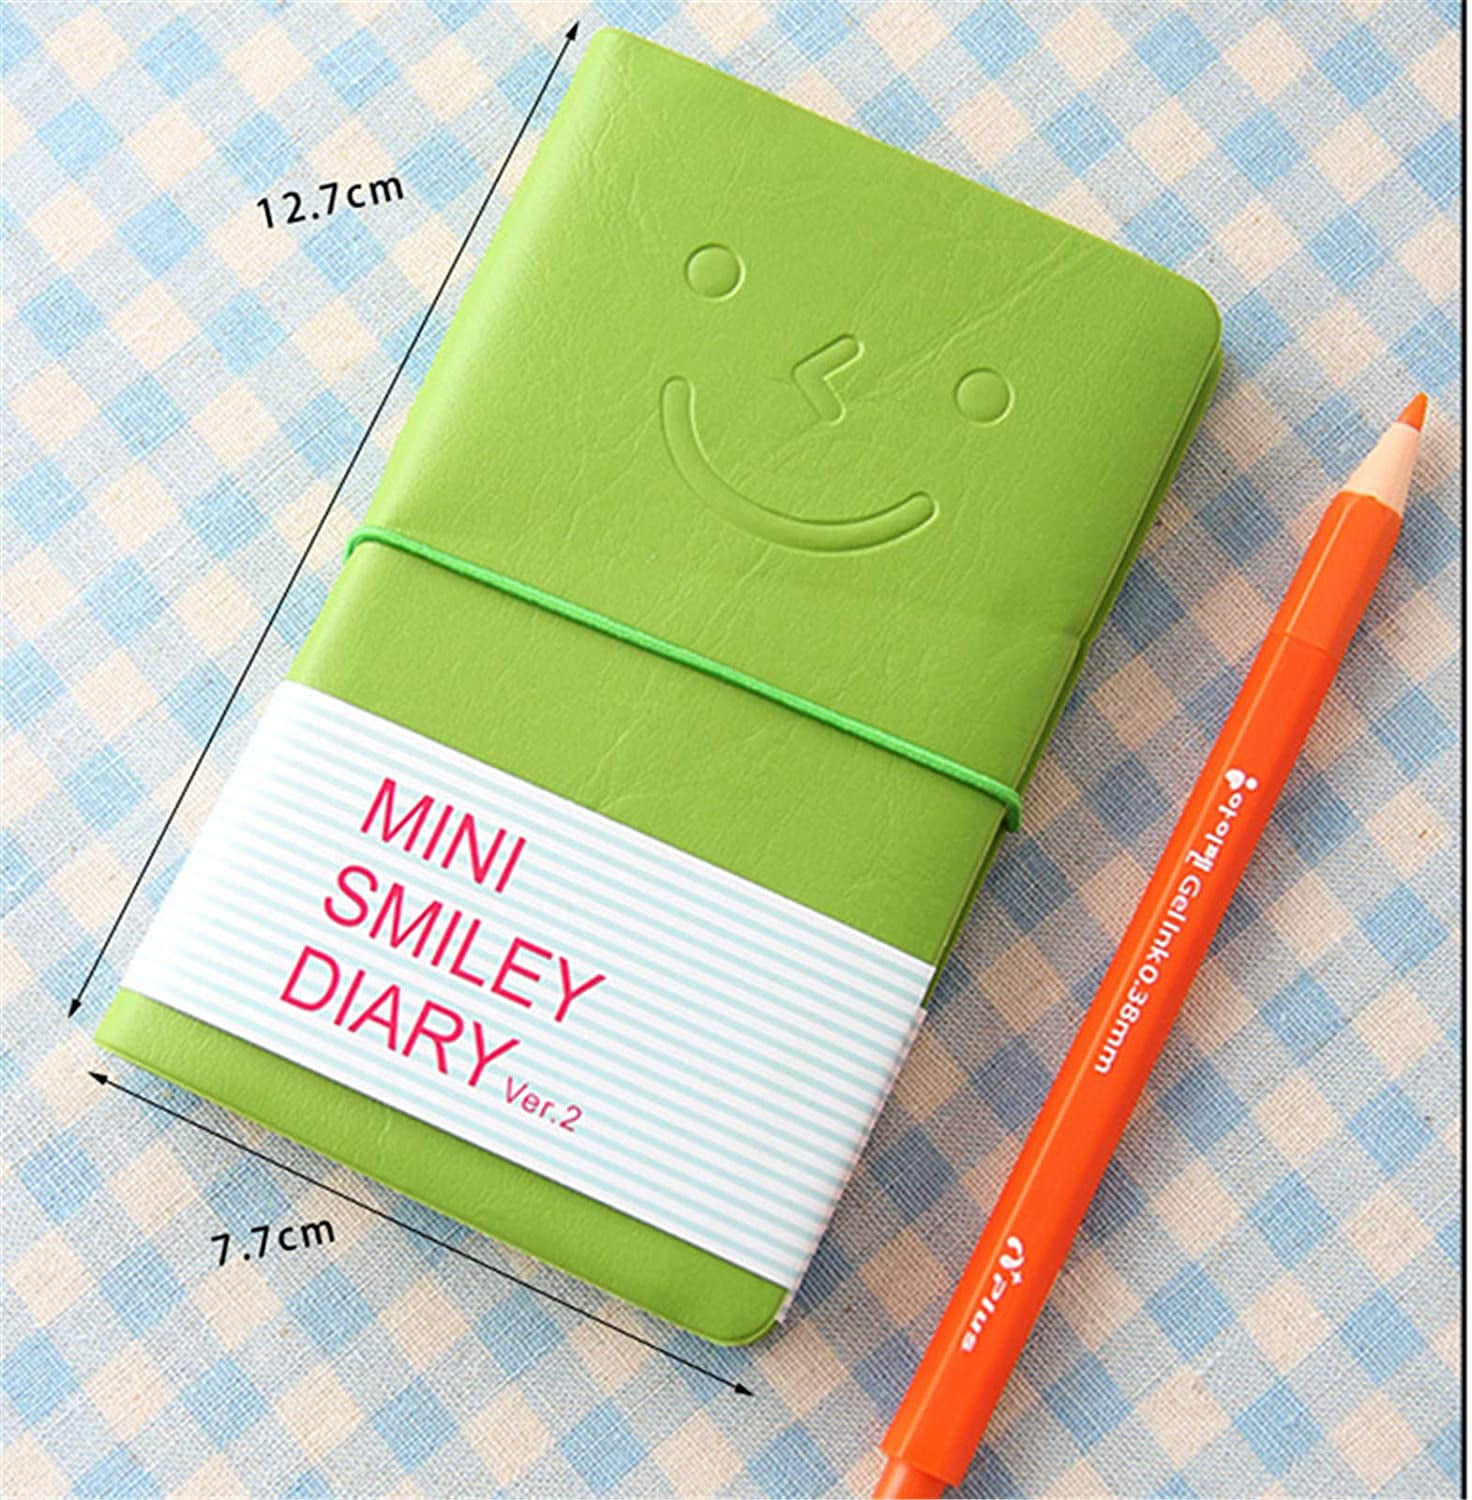 Pocket Notebook Set pack of 2 Super Mini Pocket Smiley Diary Notebooks Memo Note Book 5x3 Inch PU Leather Case Random Color 2set 